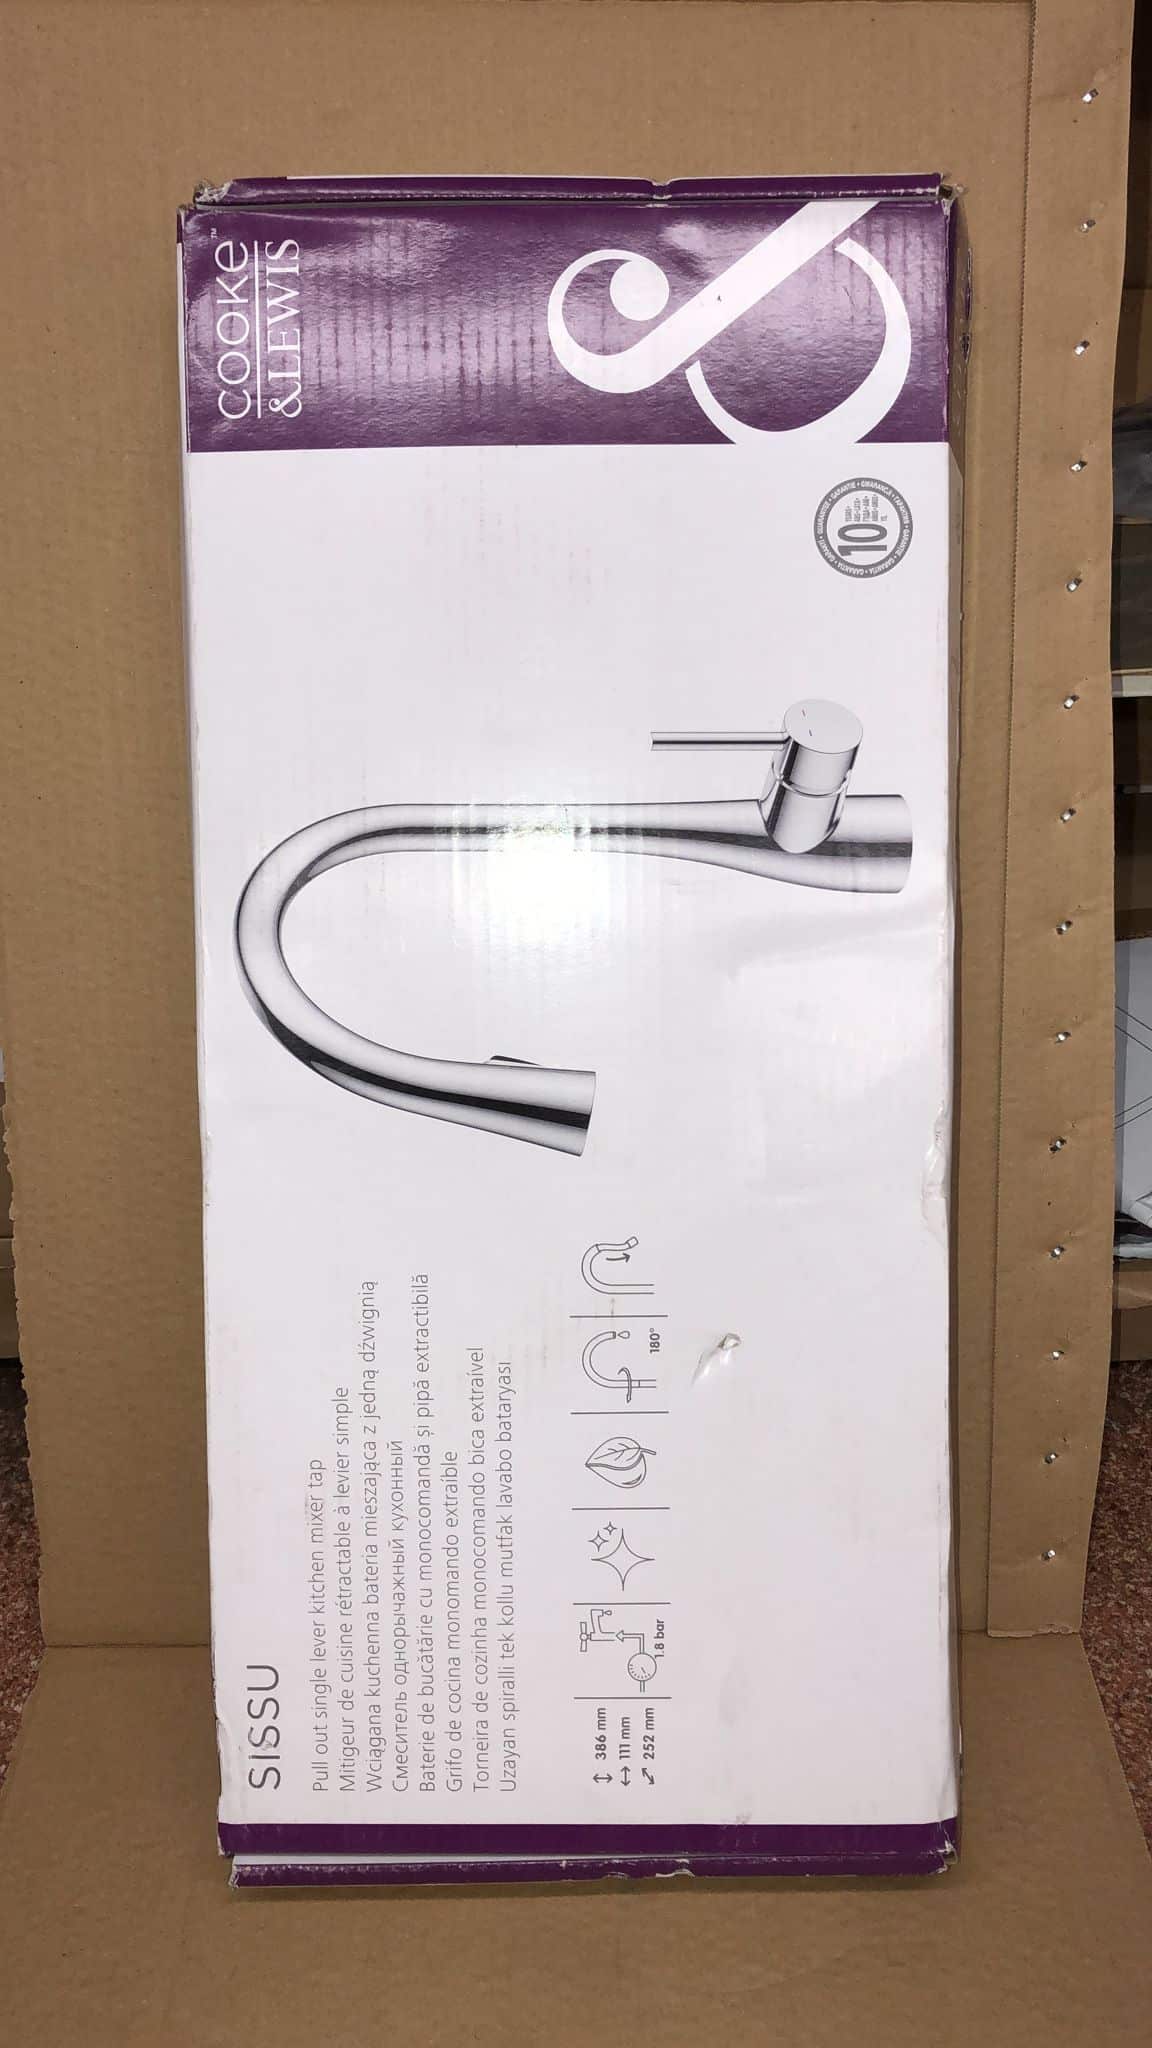 Cooke & Lewis Sissu Chrome effect Kitchen Side lever Tap 0426